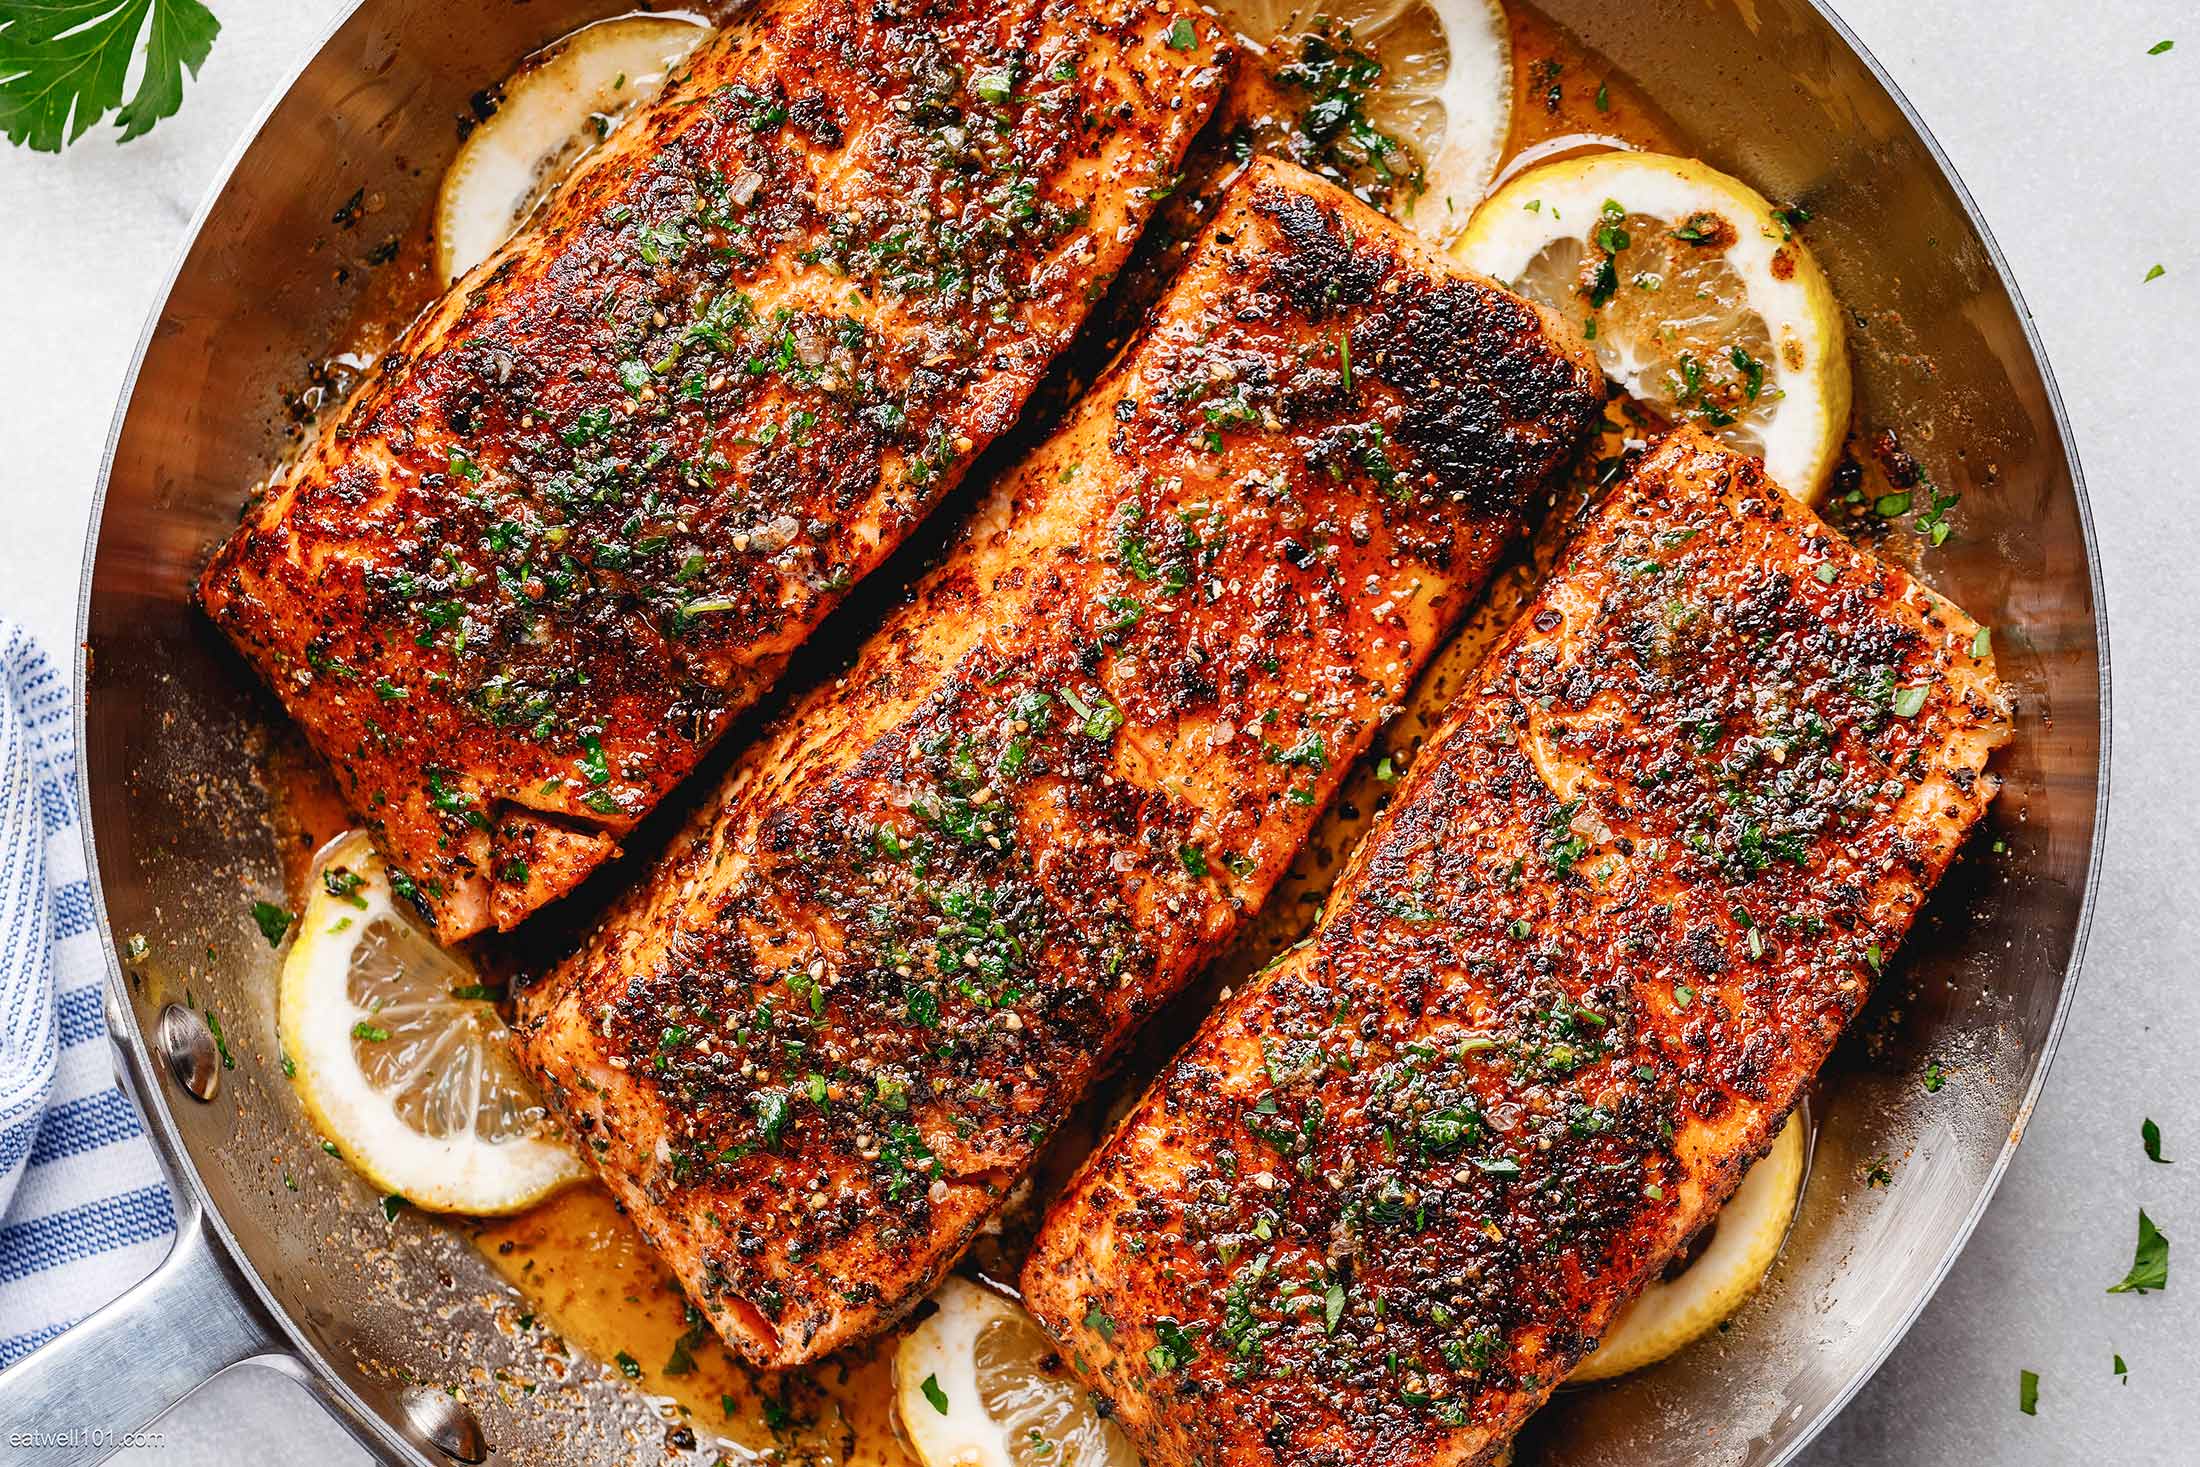 32 Easy Salmon Recipes You’ll Want to make Again and Again